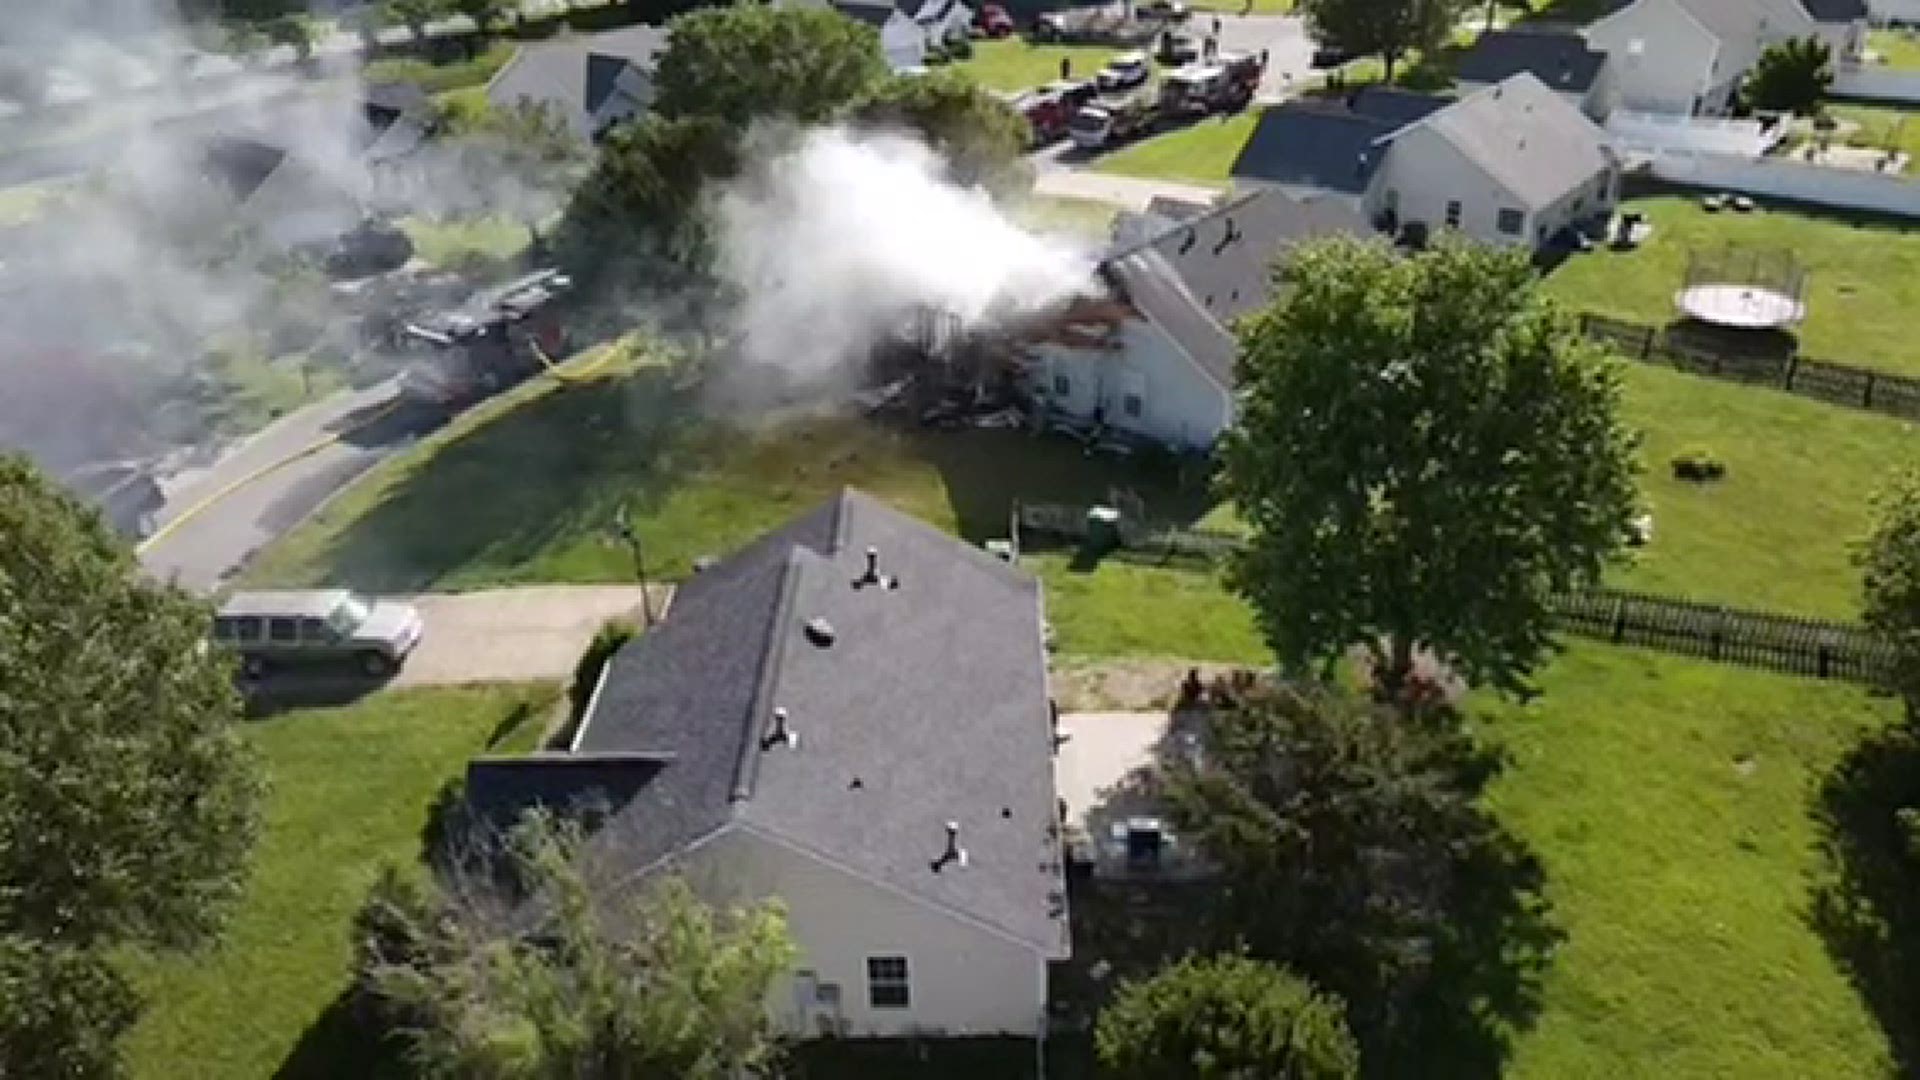 Crews are battling a house fire in Huntersville